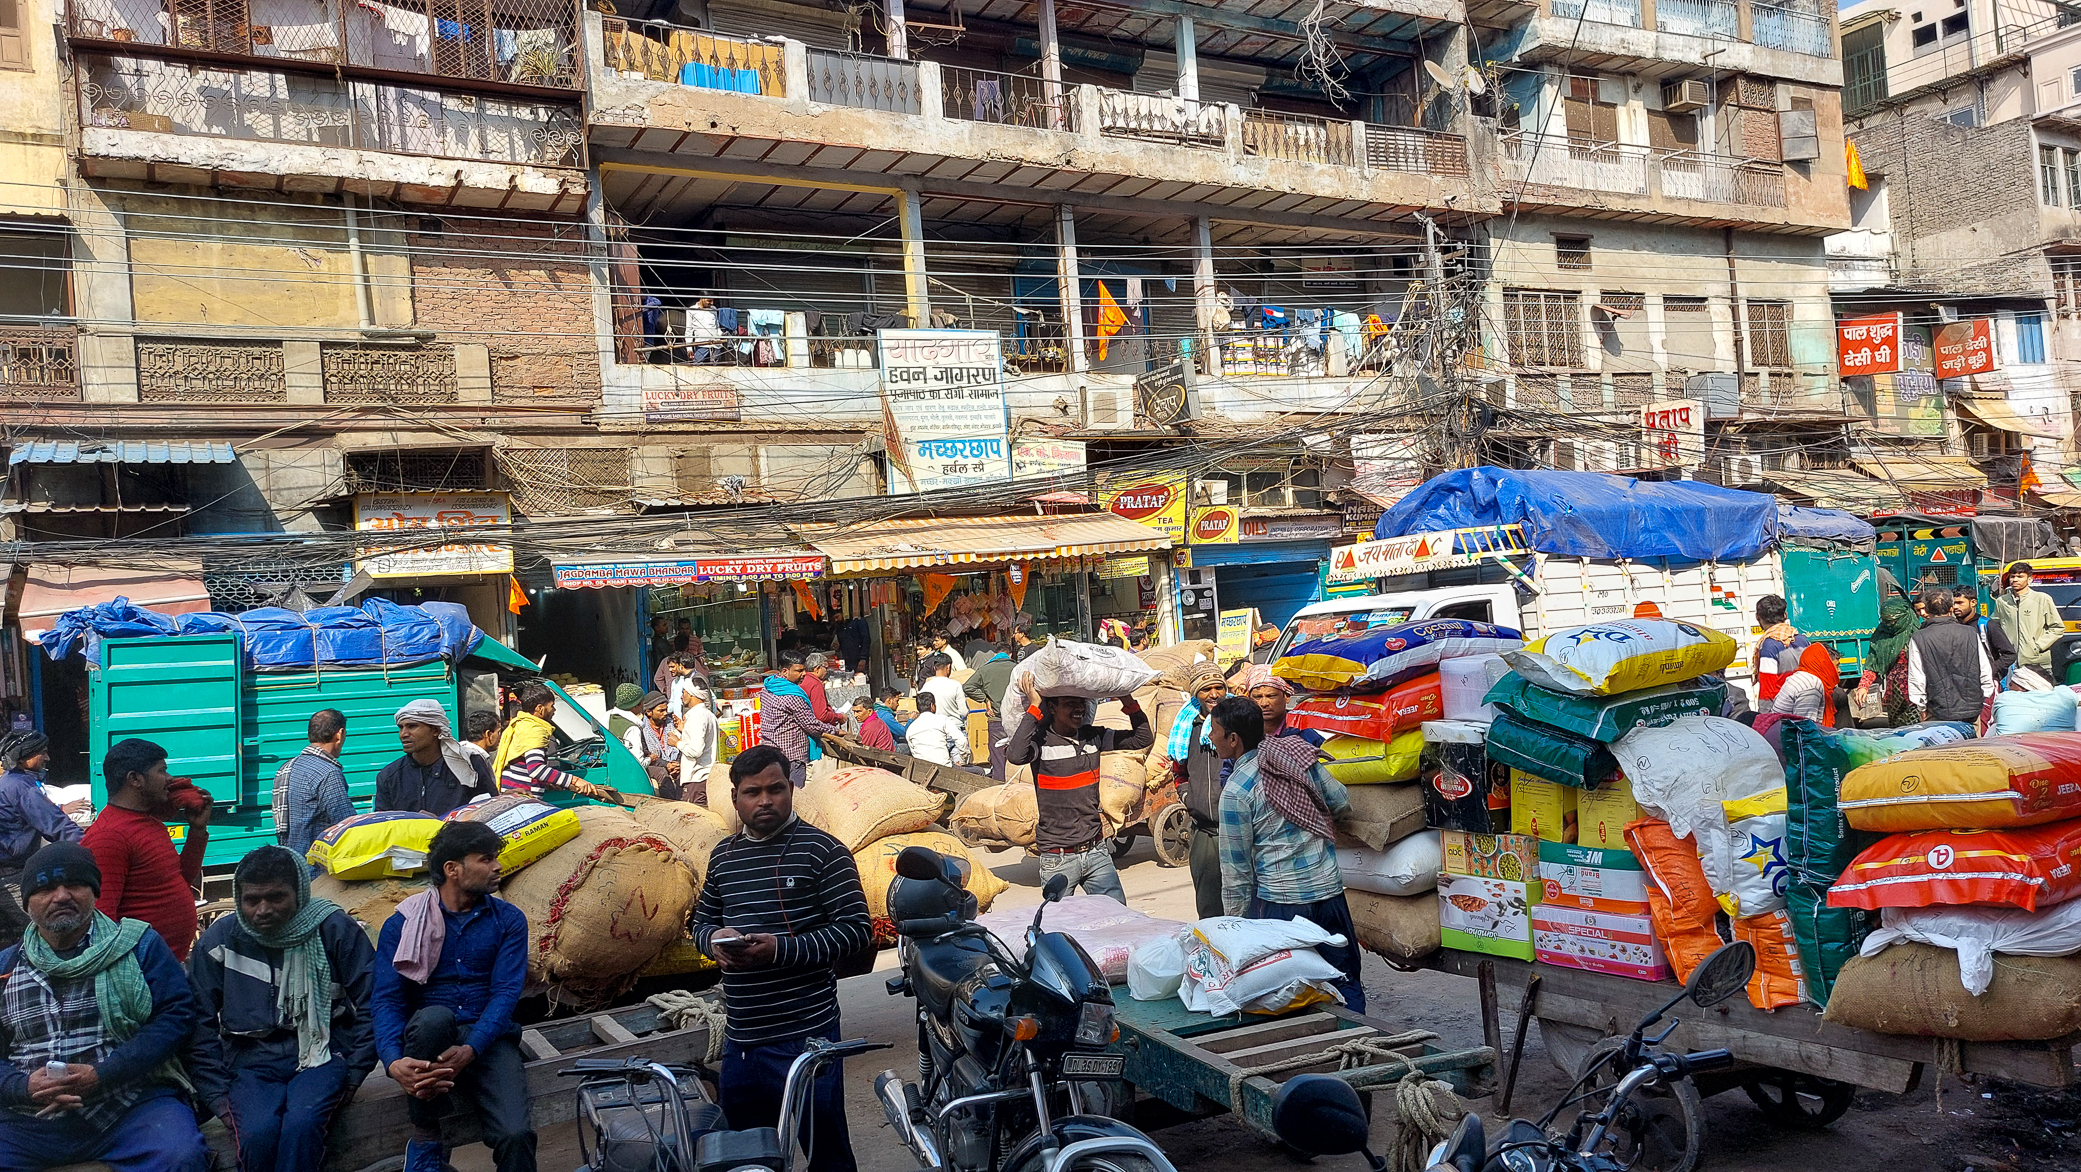 <span  class="uc_style_uc_tiles_grid_image_elementor_uc_items_attribute_title" style="color:#ffffff;">Old Delhi: streets are full (of life)</span>